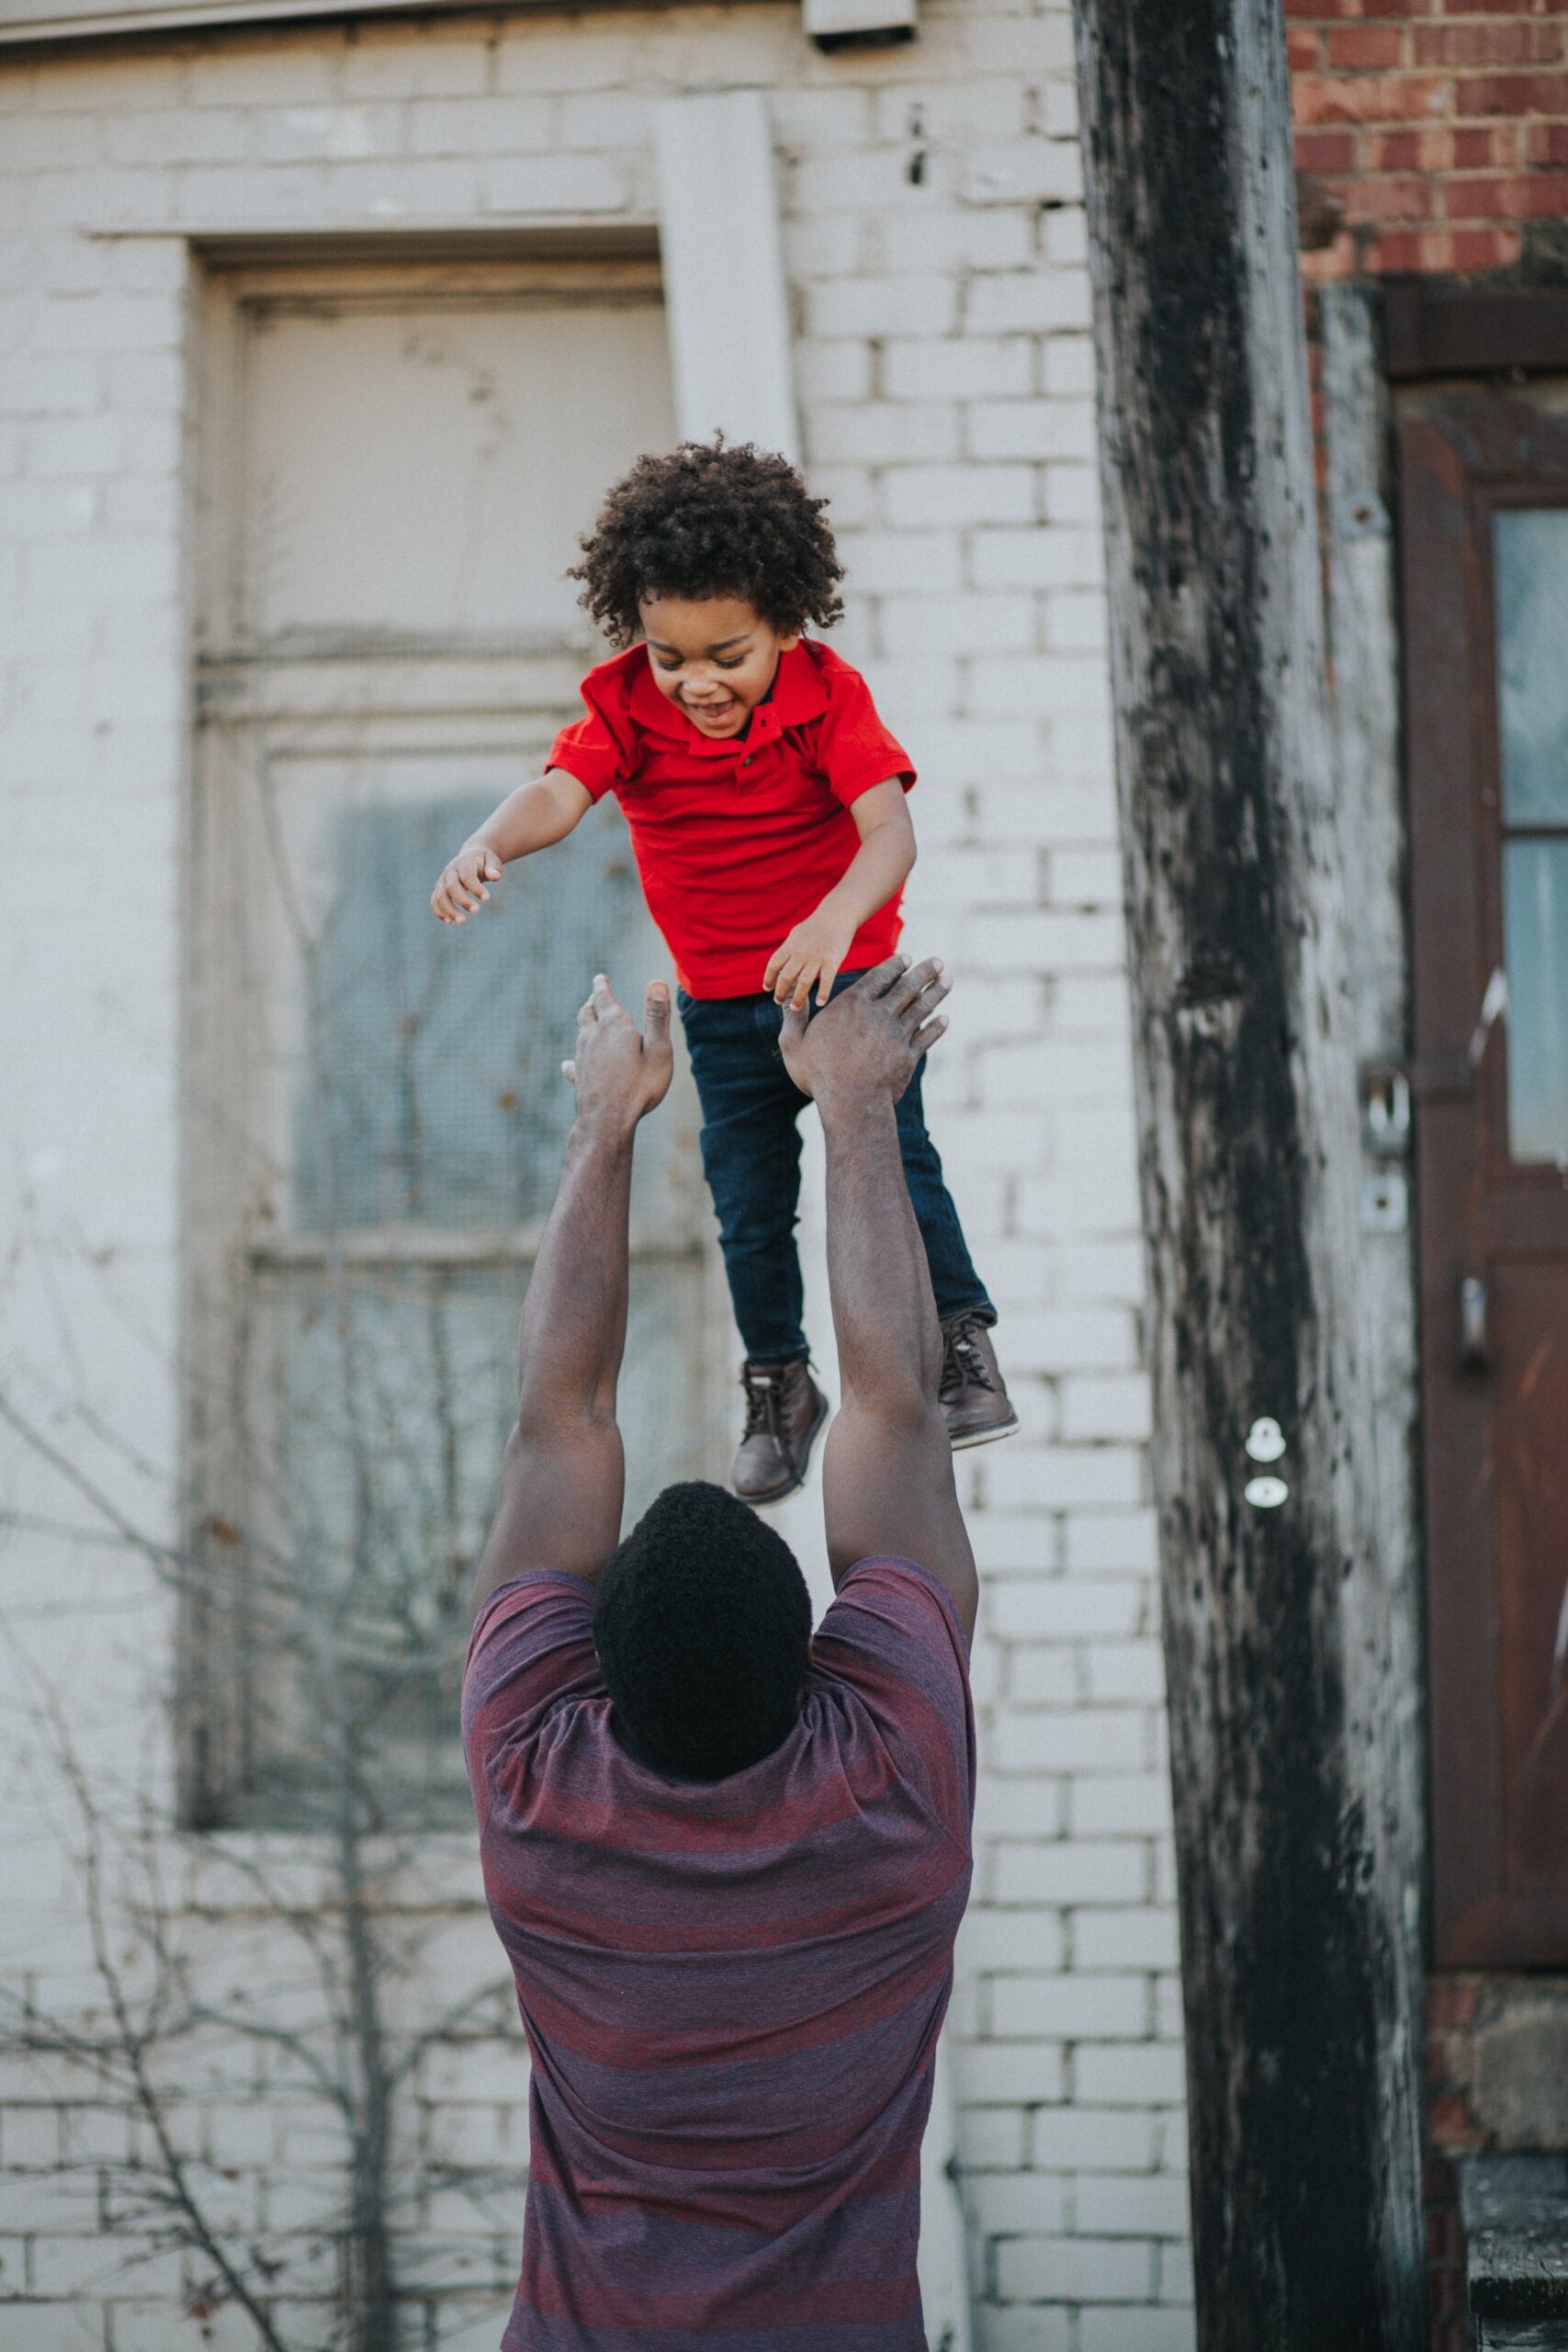 A father tossing his son up in the air.